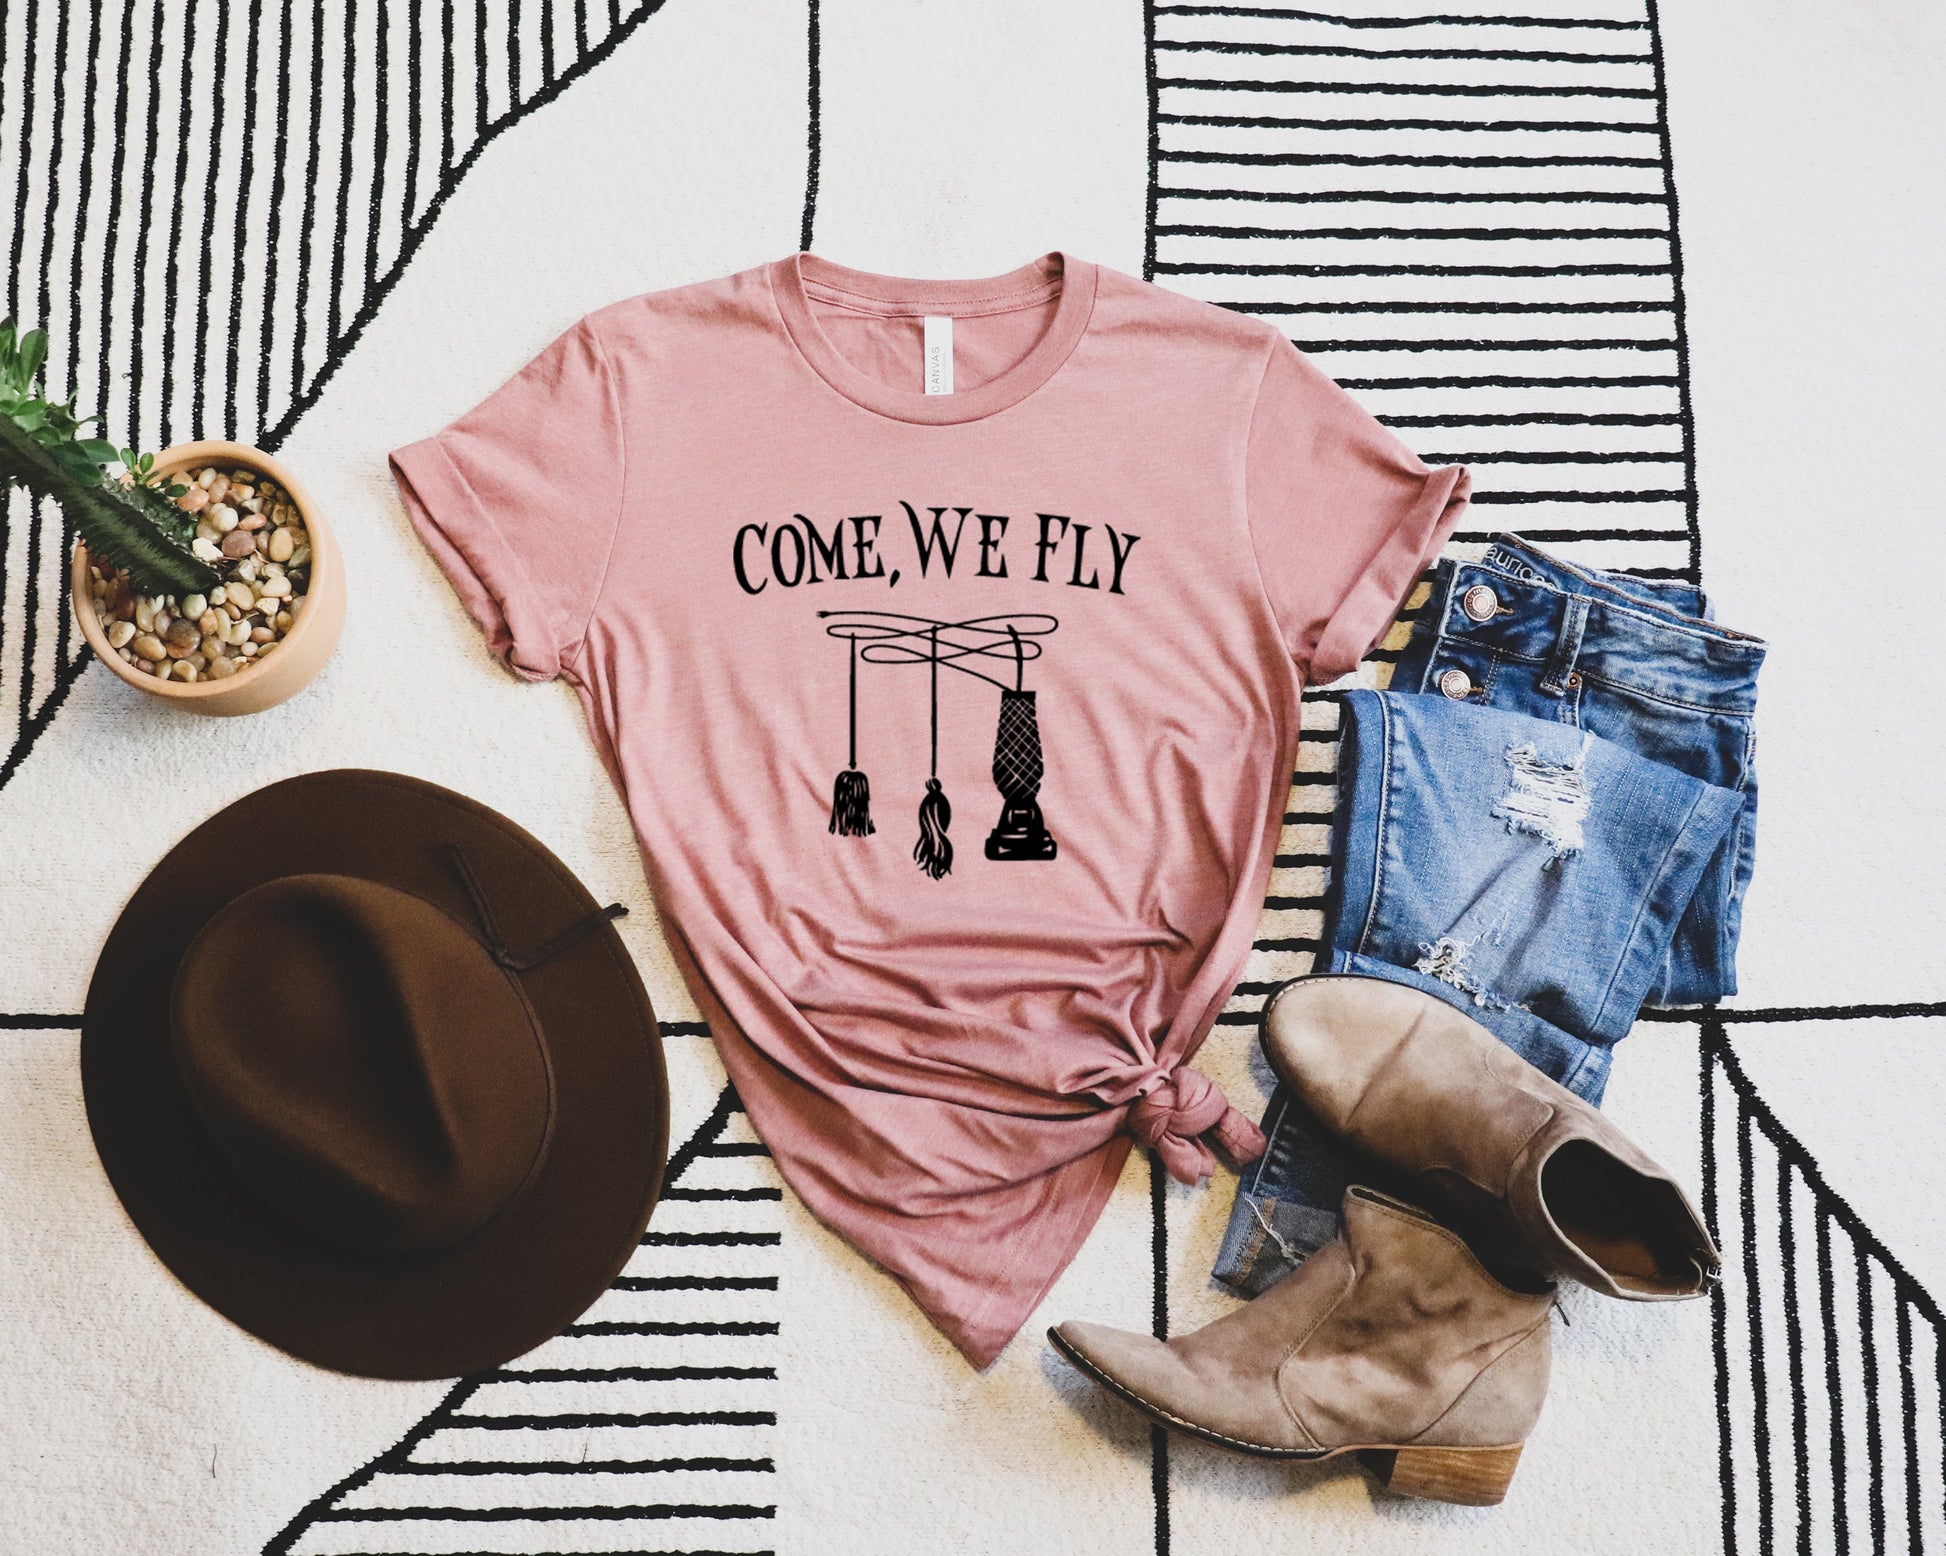 Come We Fly Shirt, Witch Sisters Shirt - MoonlightMysticVibes.com